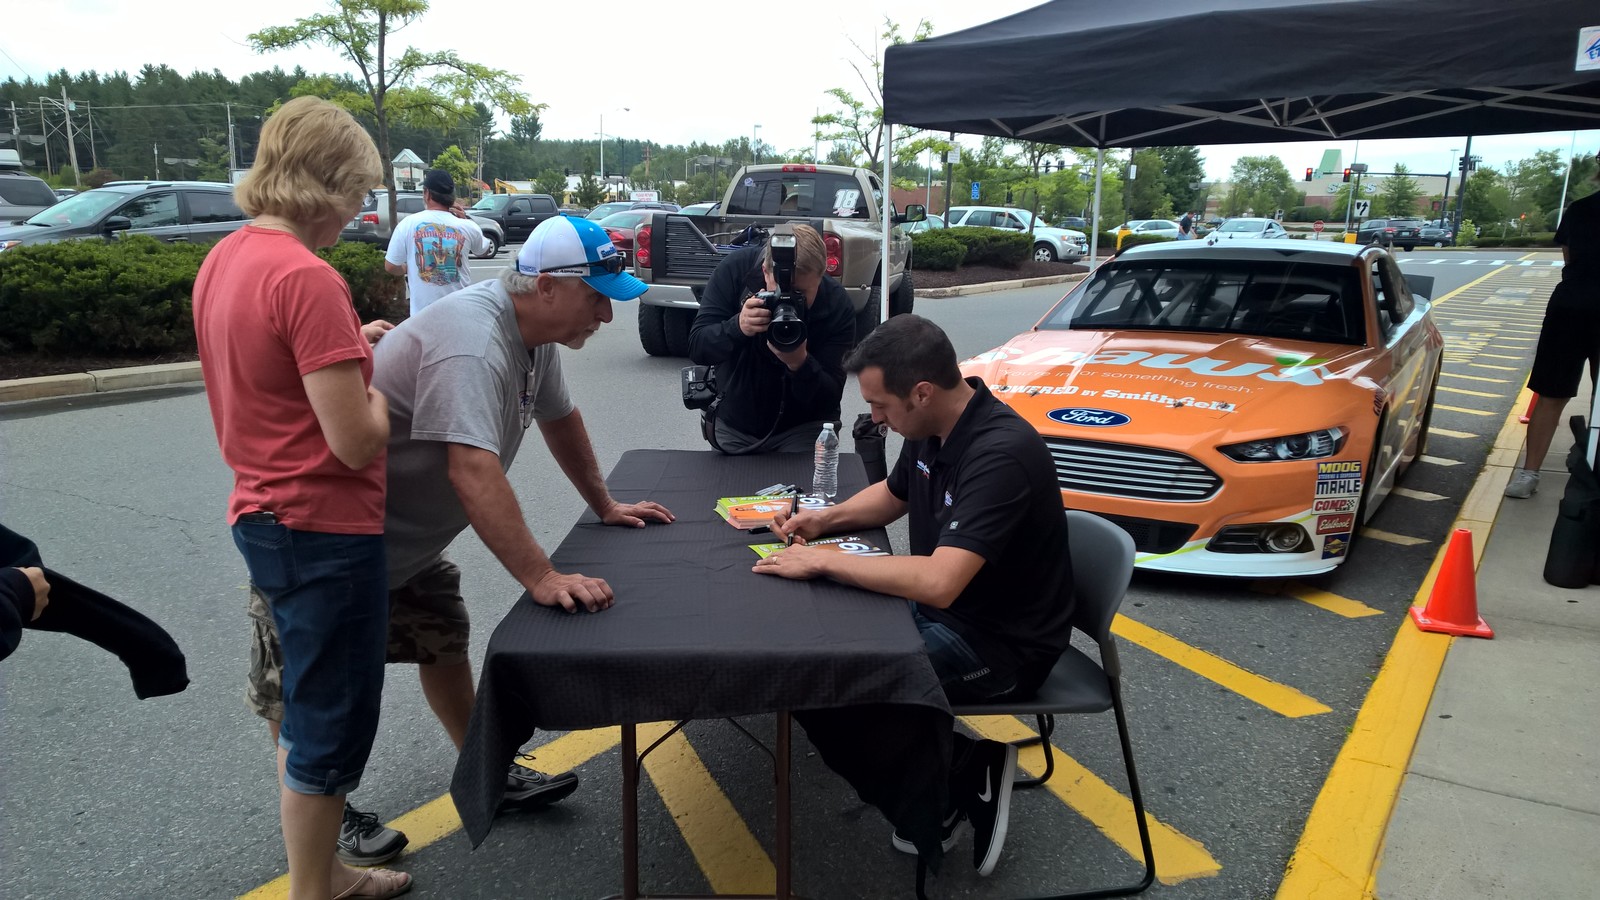 NASCAR Sprint Cup Series driver Sam Hornish Jr. signing for fans at an appearance event at Shaw's of Concord, New Hampshire on July 18th, 2015.